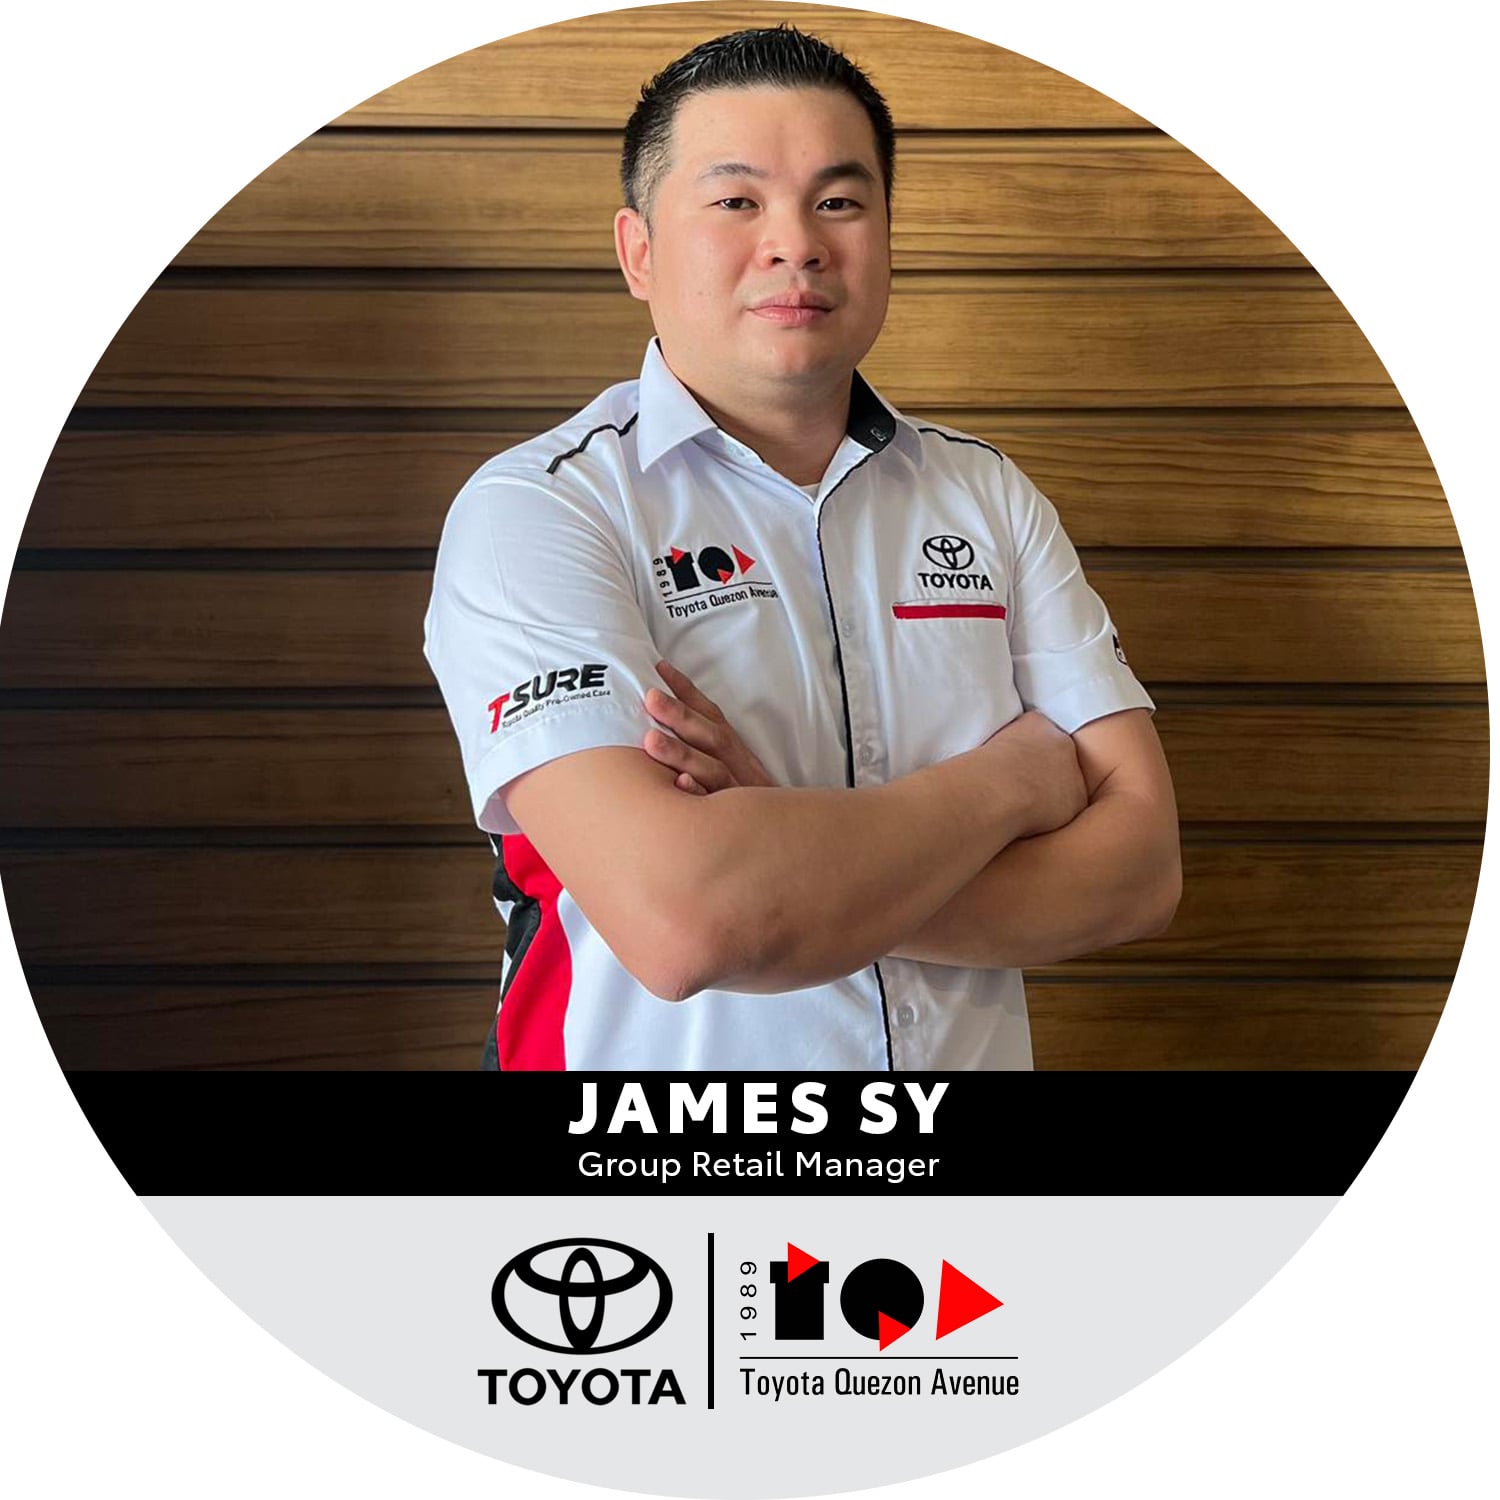 Certified Toyota Marketing Professionals - James Sy